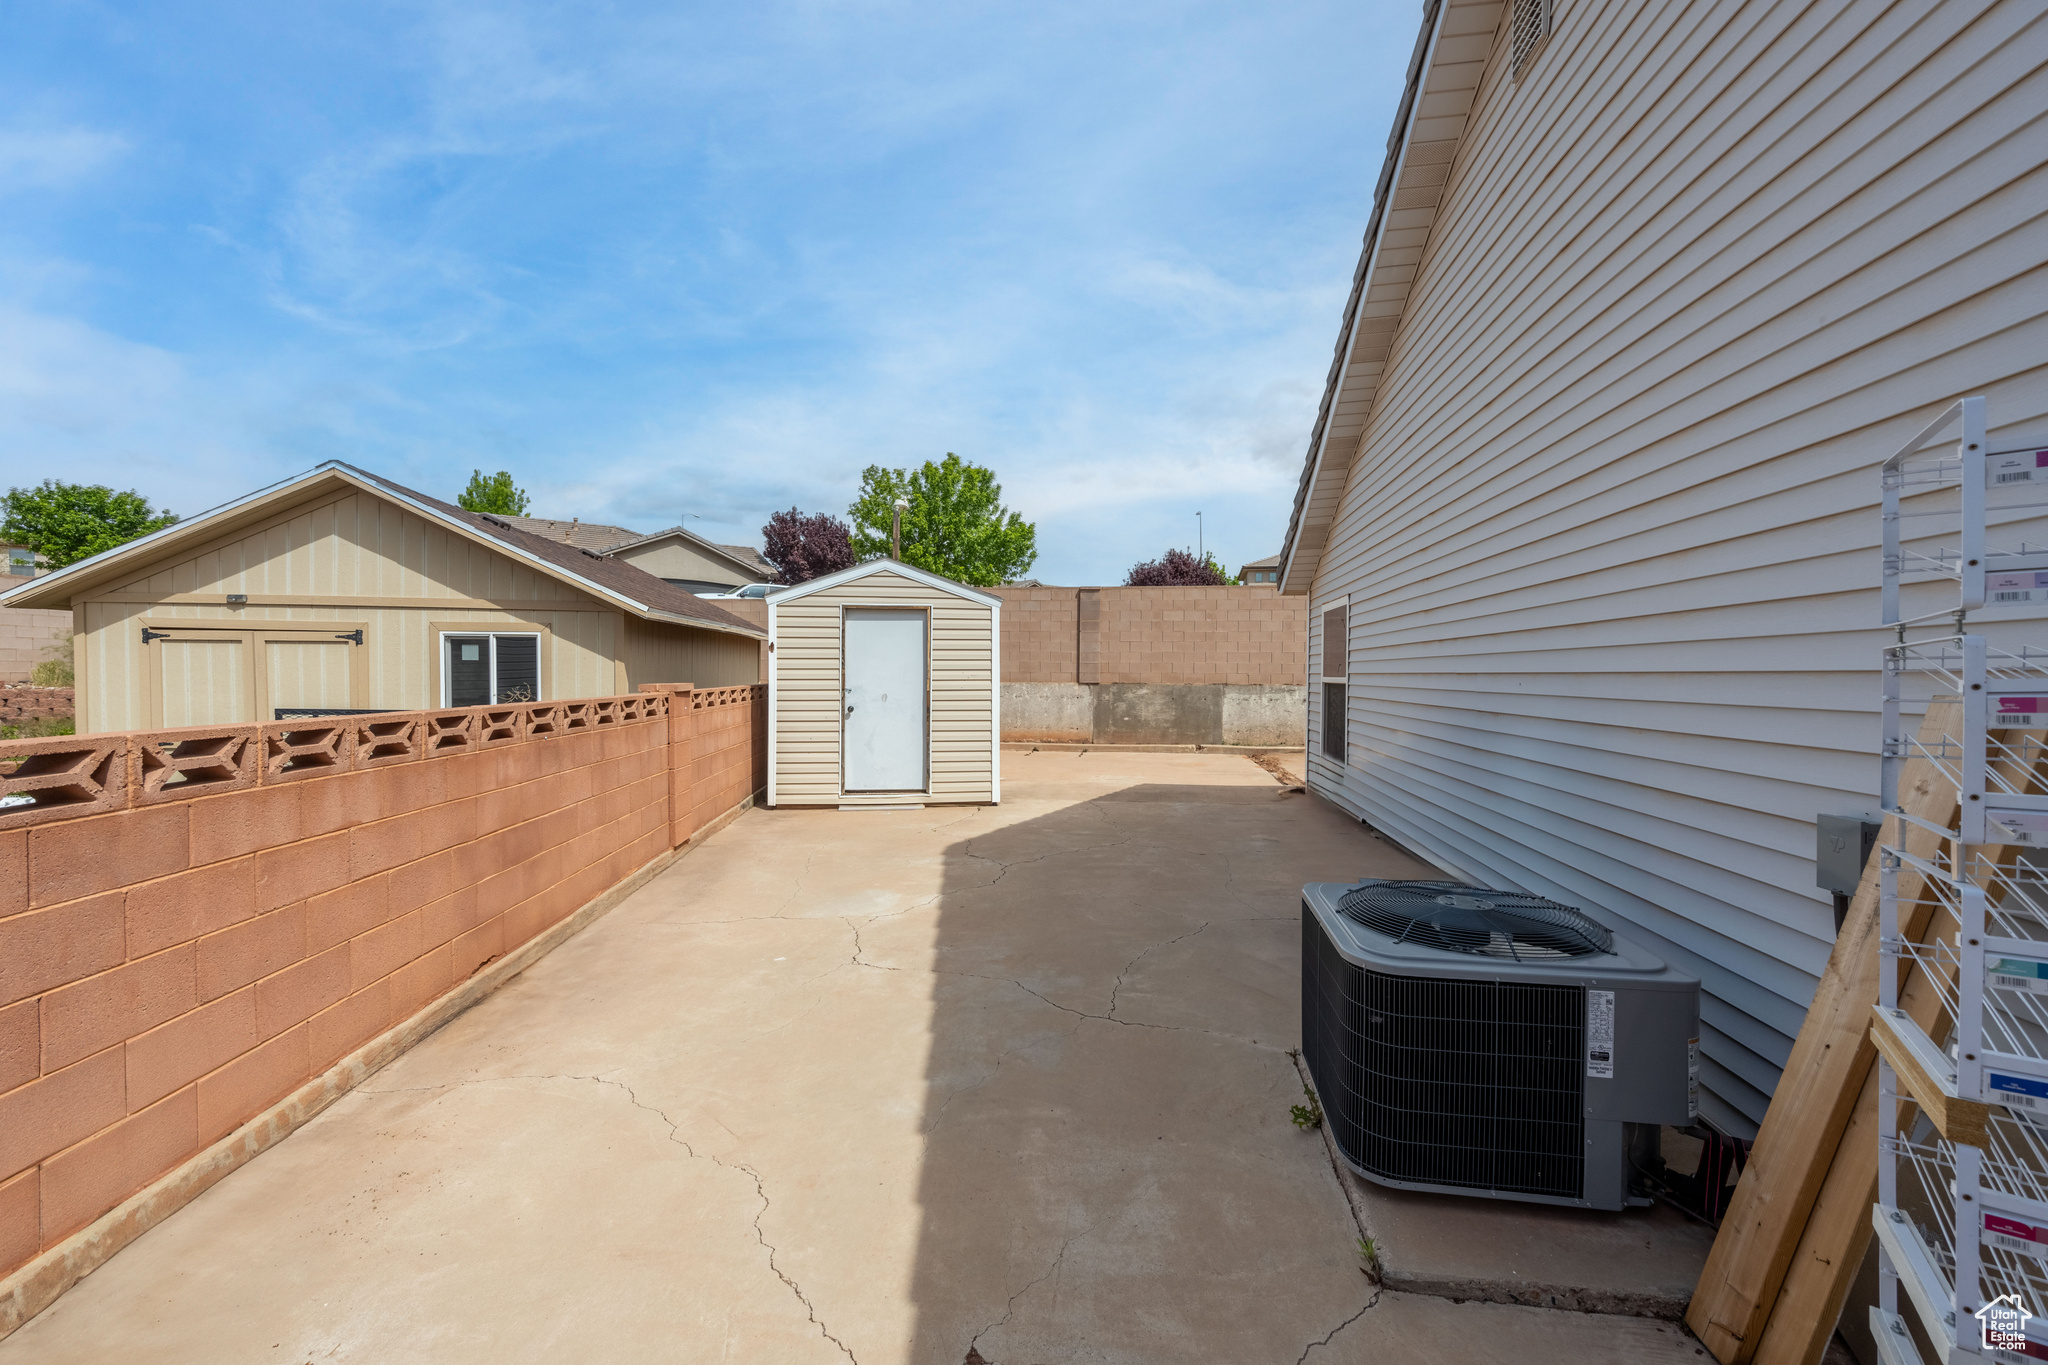 View of patio / terrace featuring central AC unit and a storage shed